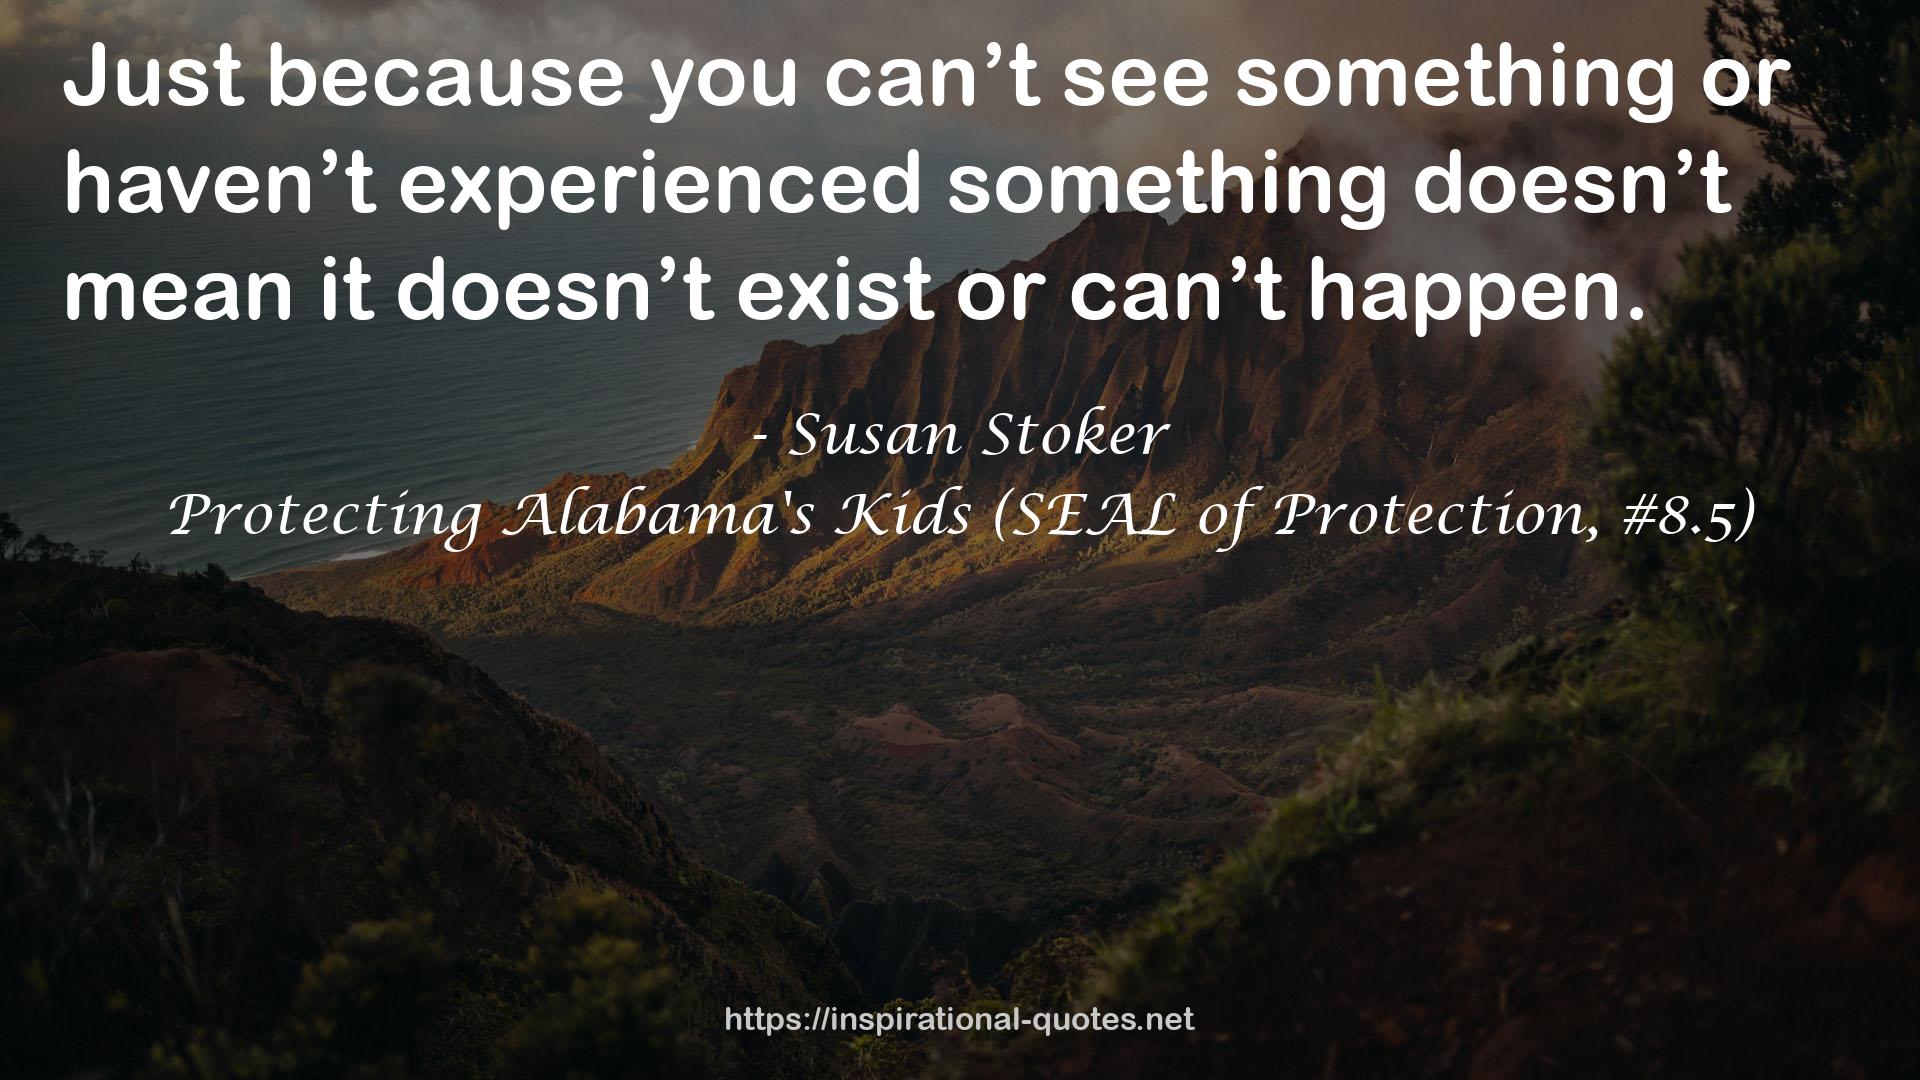 Protecting Alabama's Kids (SEAL of Protection, #8.5) QUOTES